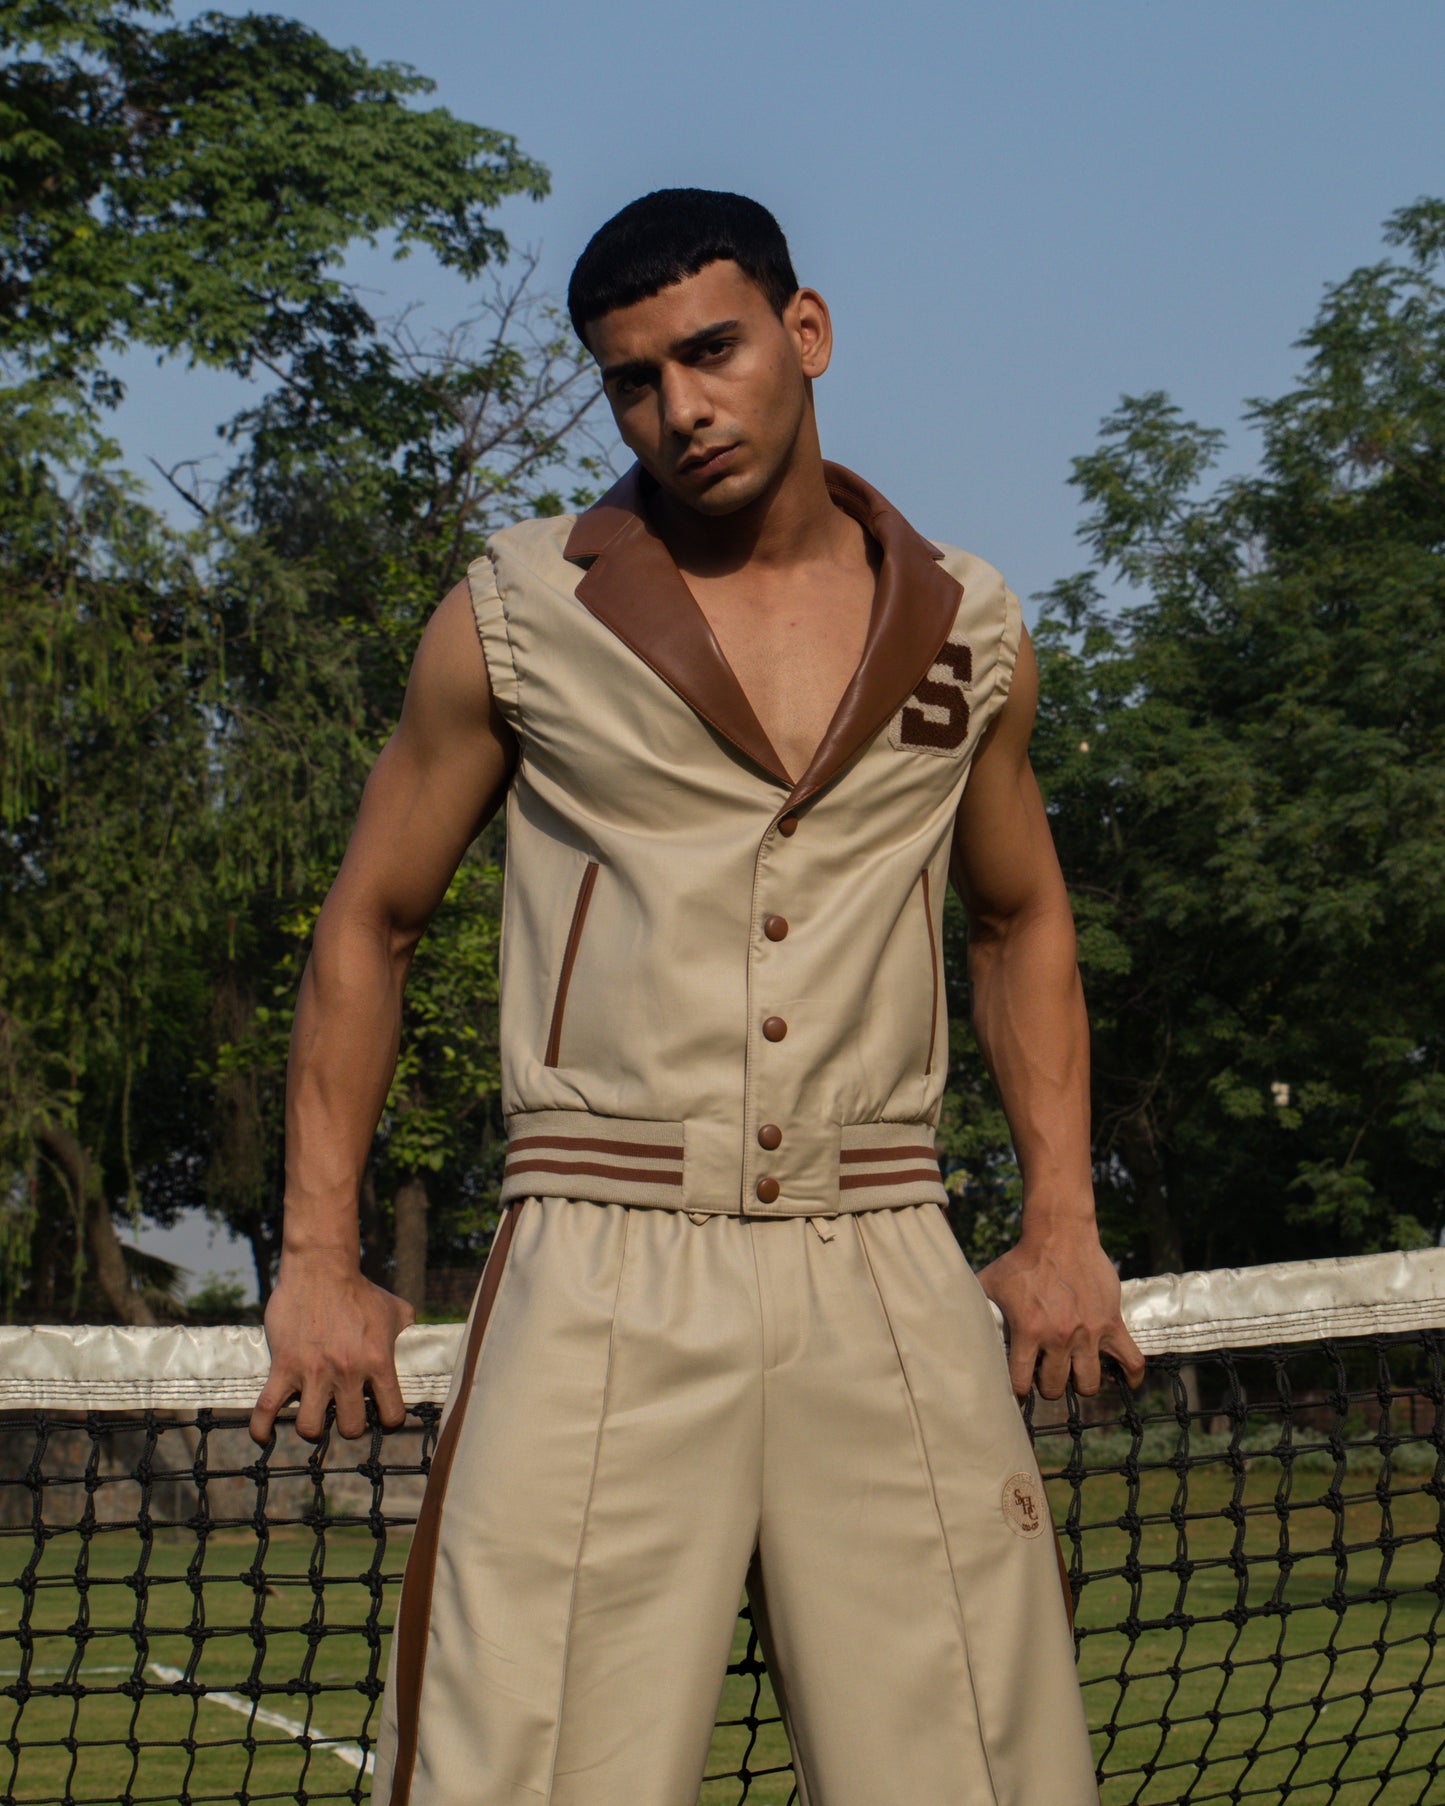 COUNTRY CLUB VEST